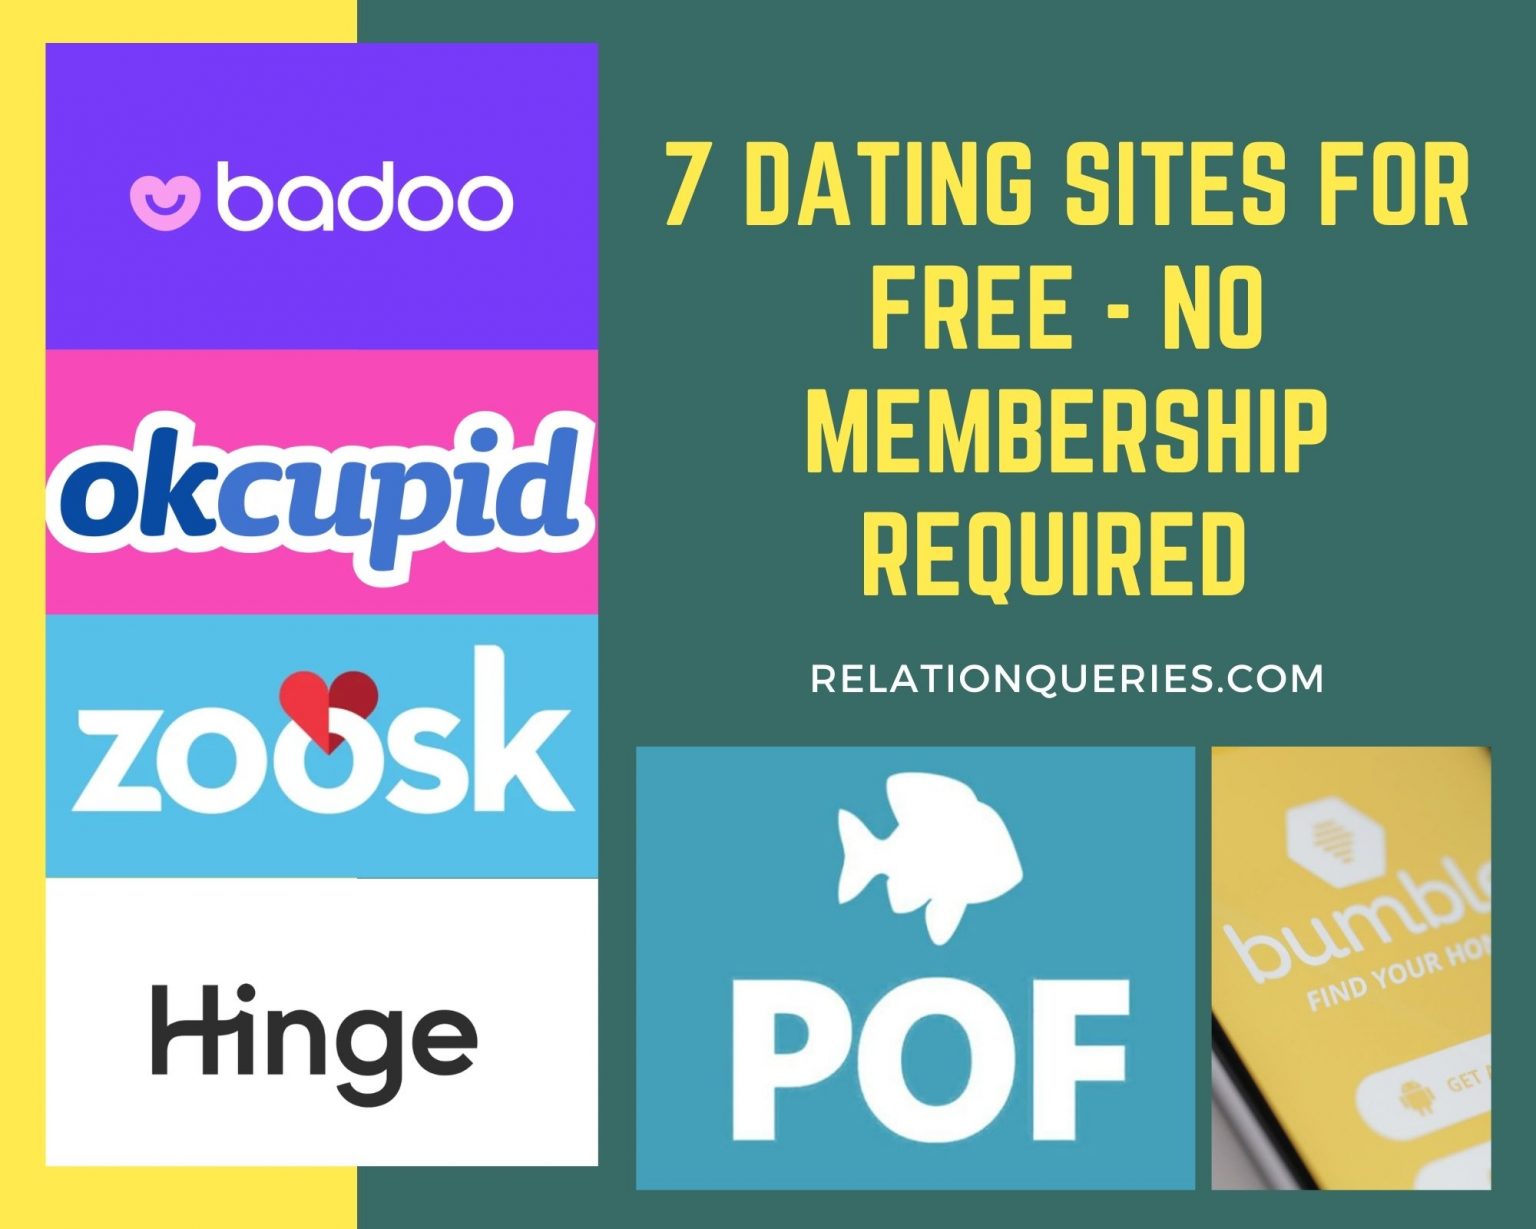 Internet dating sites: are they any different? How do they work? How to ...